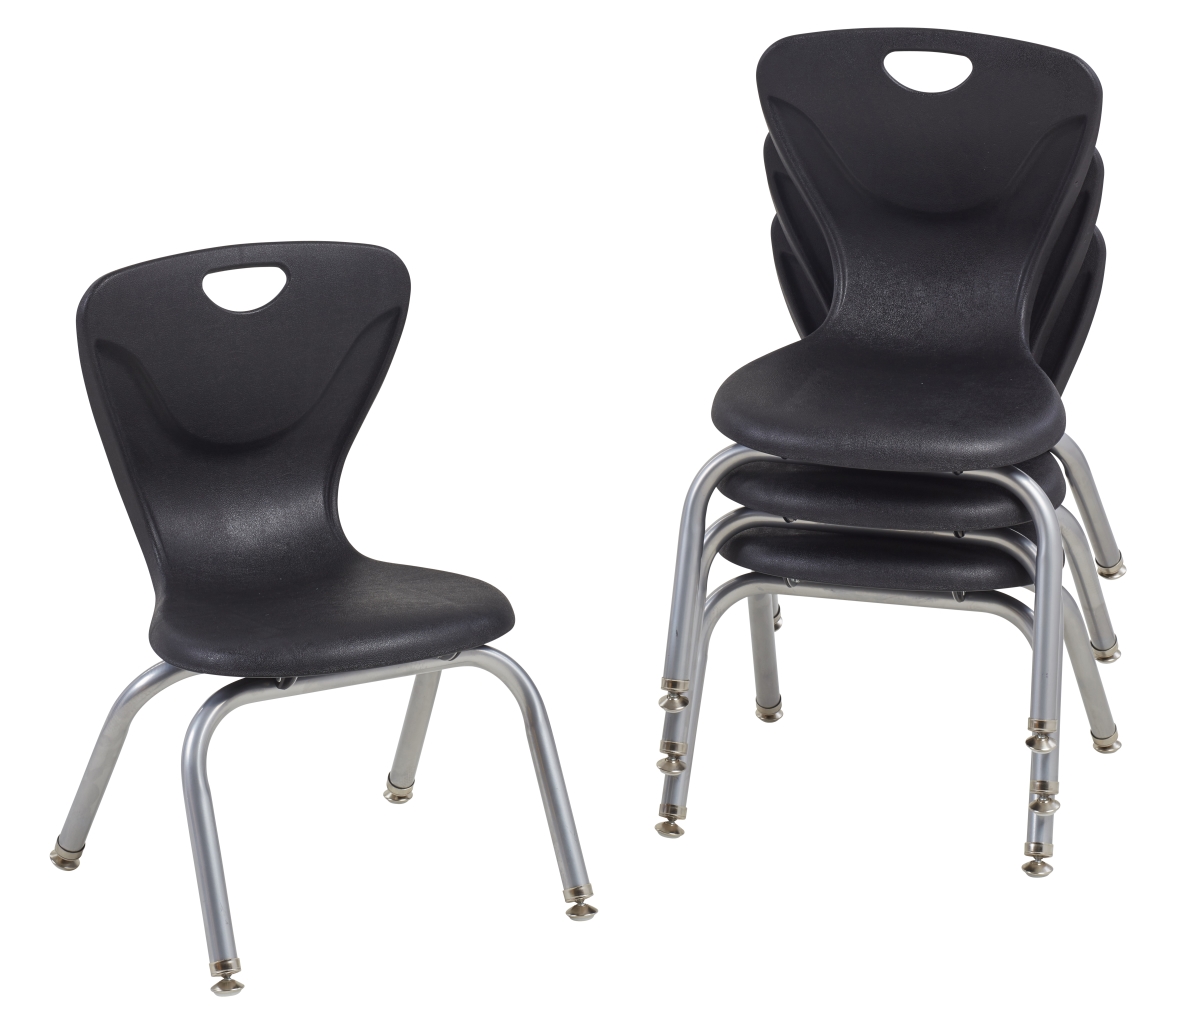 10373-bk 12 In. Contour Chair With Swivel Glide - Black - Pack Of 4